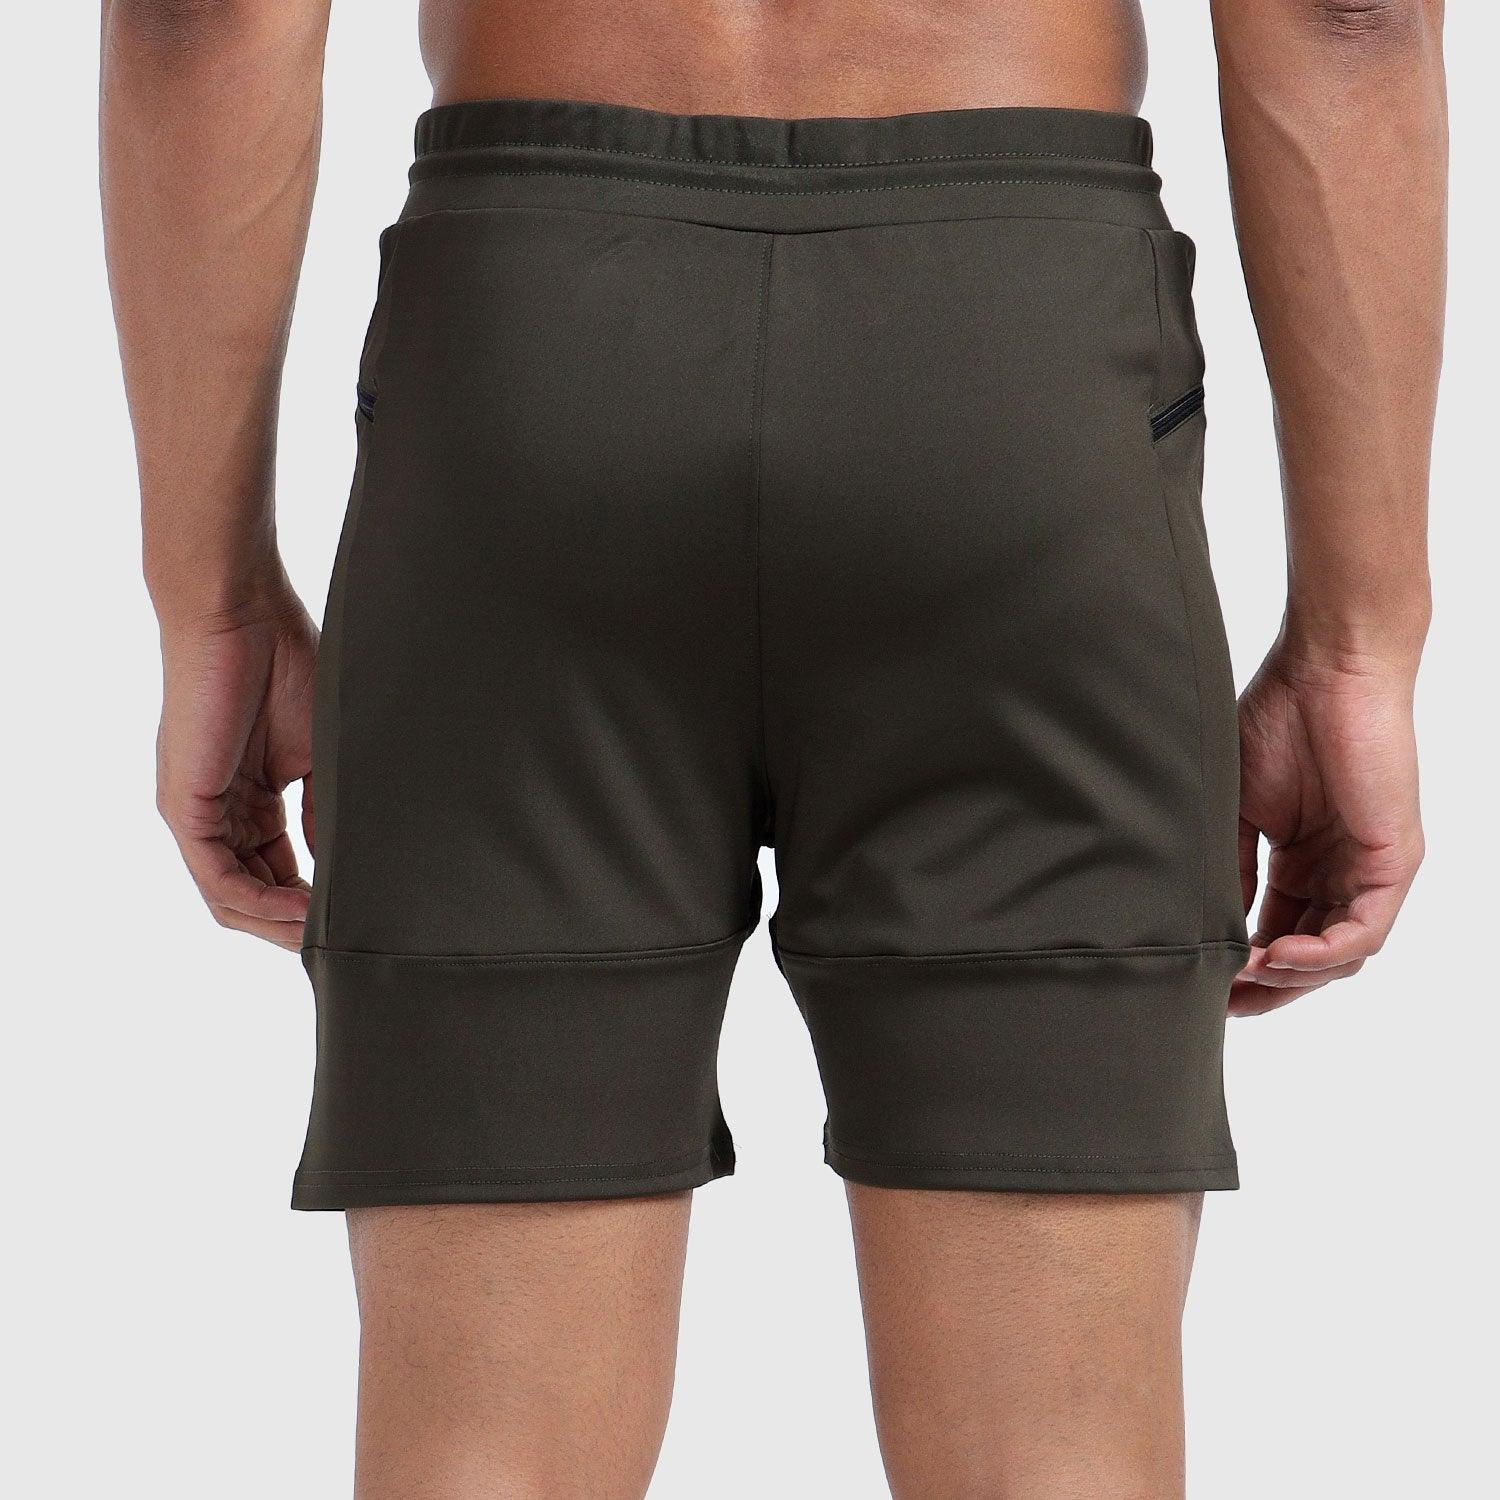 Denmonk's fashionable Power Shorts core olive shorts for men will boost your level of gym fitness.